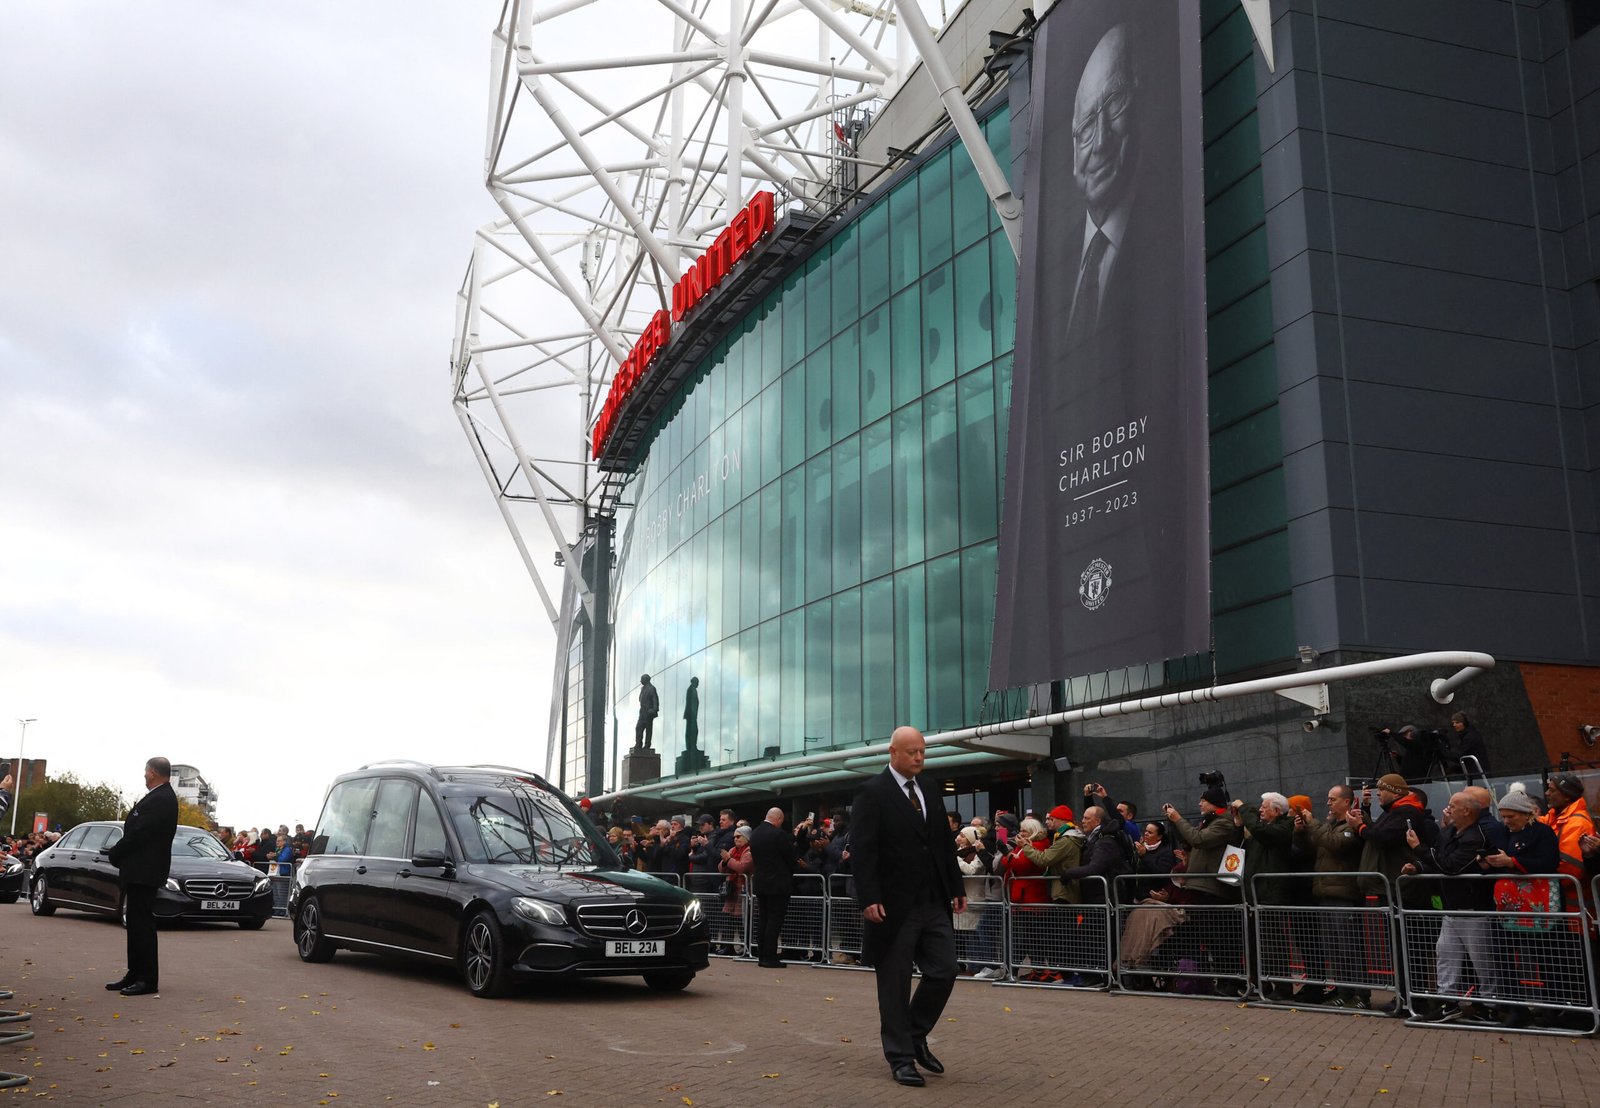 thousands-of-fans-welcome-charlton-funeral-cortege-at-old-trafford